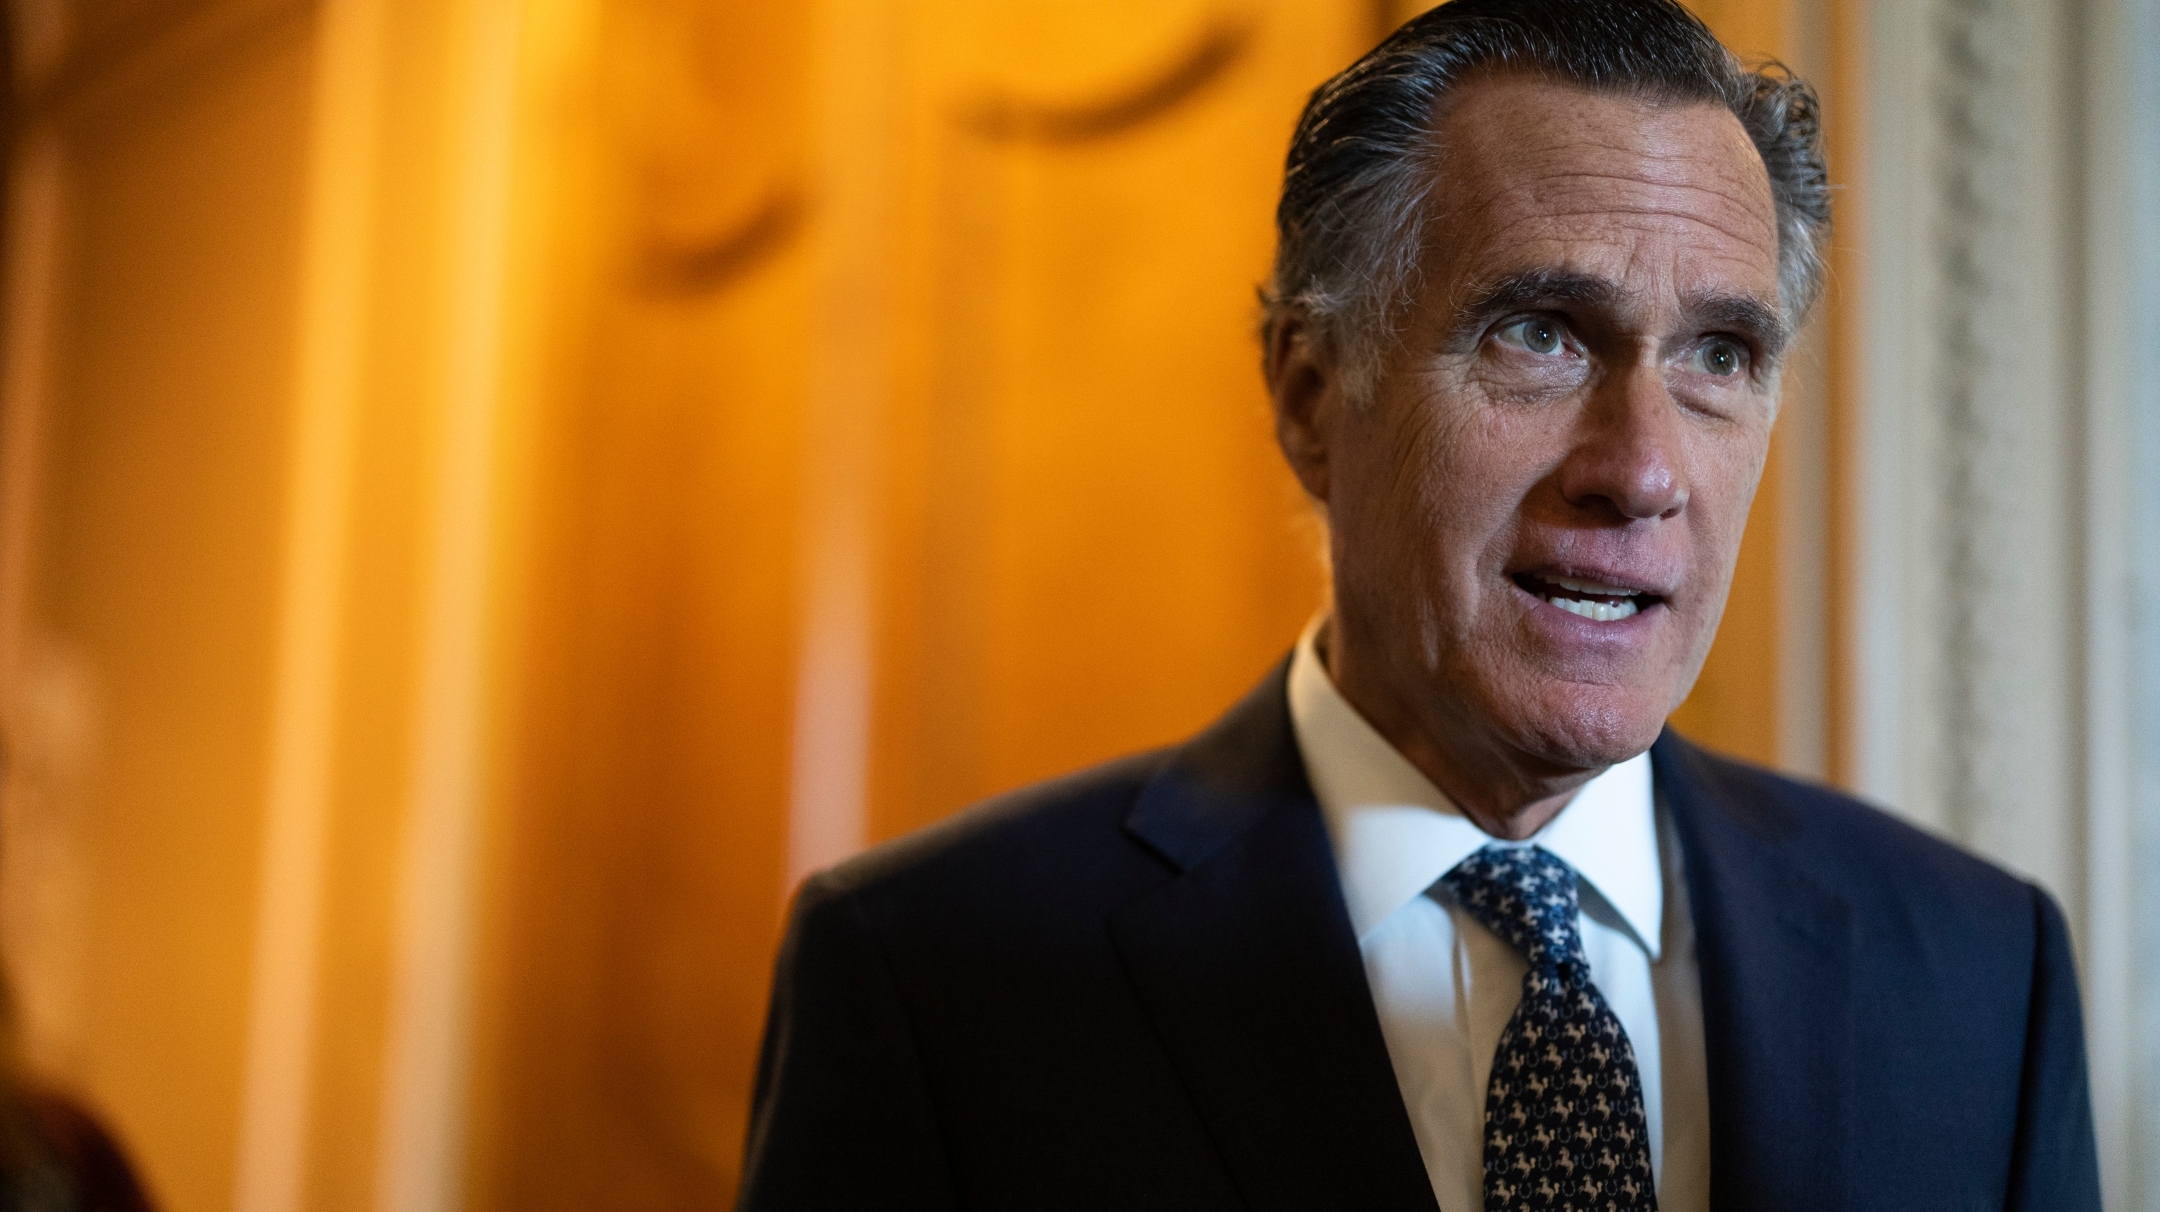 Sen. Mitt Romney, a Utah Republican, speaks to reporters outside of the Senate Chambers during a series of votes in the U.S. Capitol Building, May 11, 2022. (Anna Moneymaker/Getty Images)